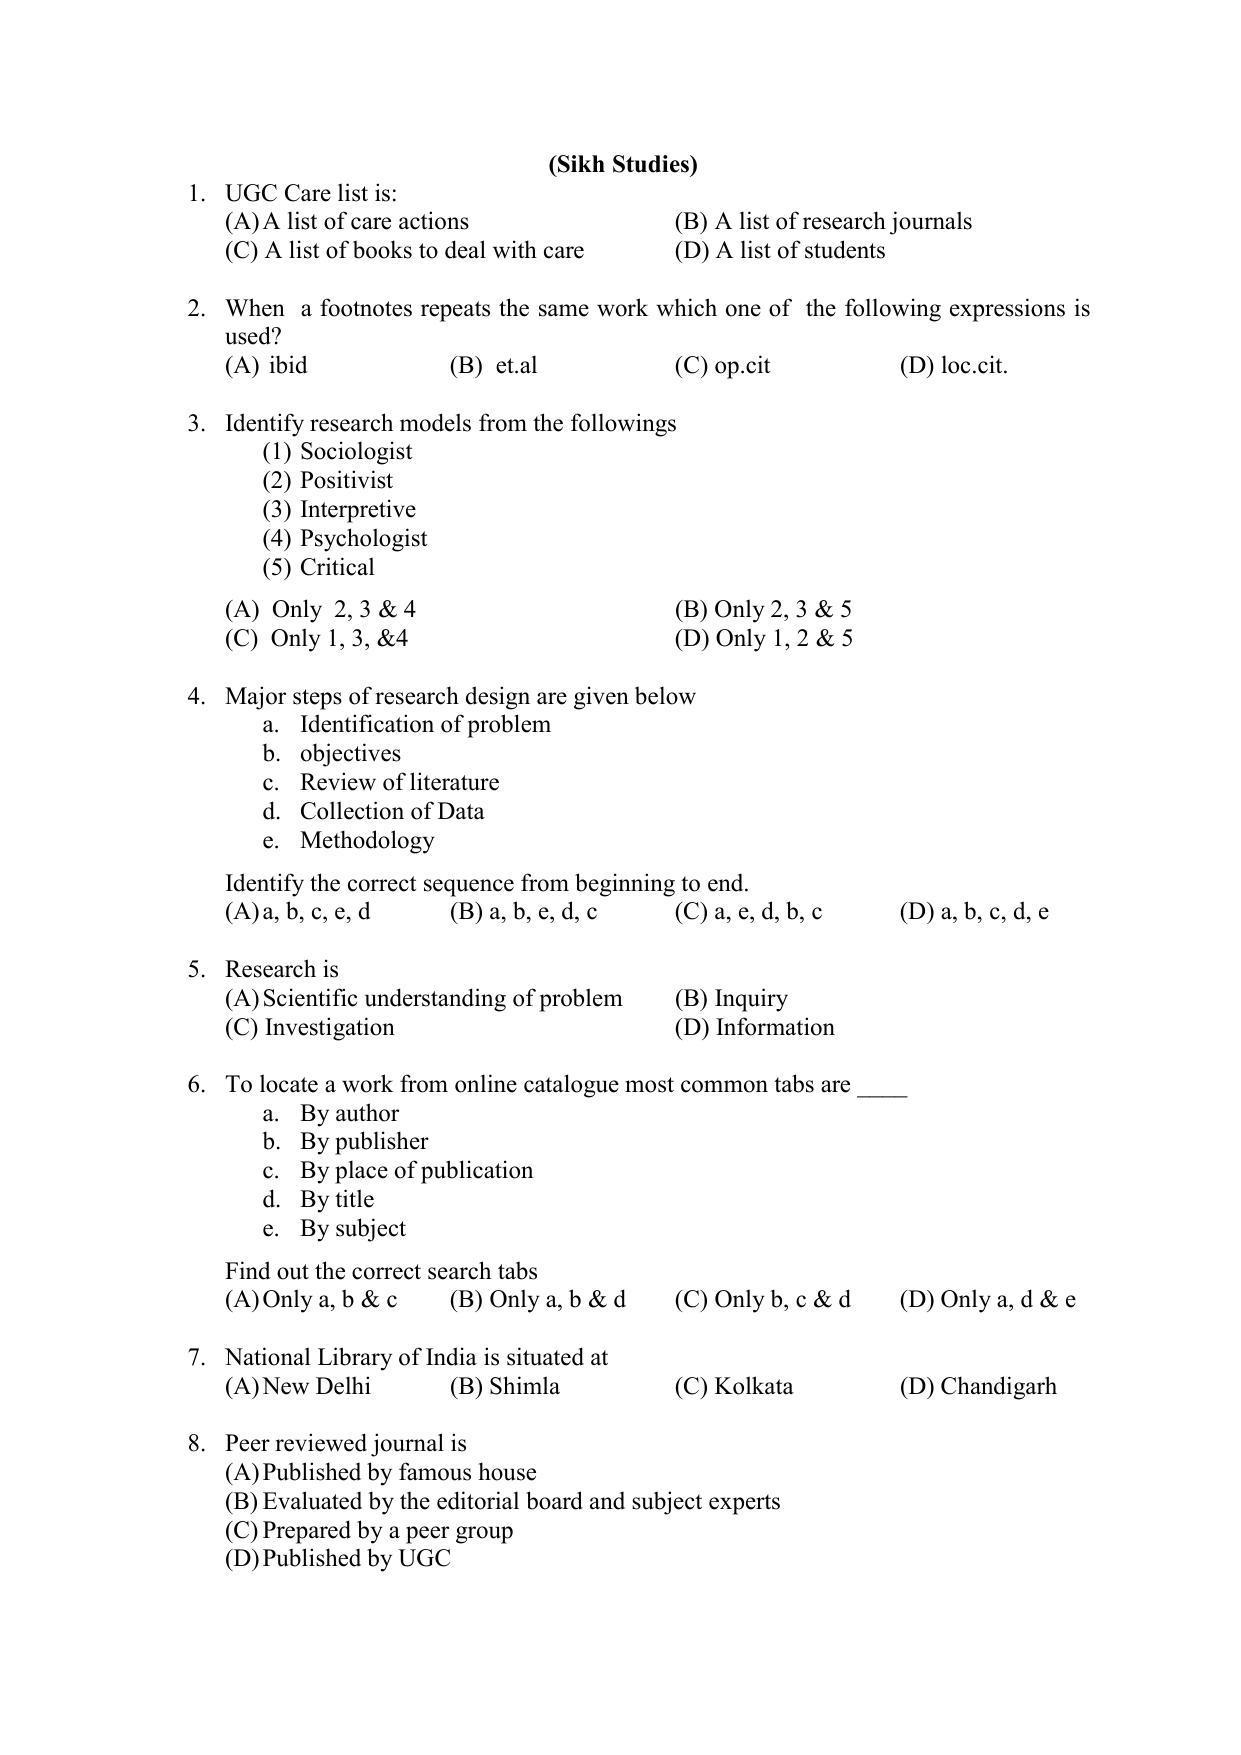 PU MPET Ancient Indian History & Archeology 2022 Question Papers - Page 53